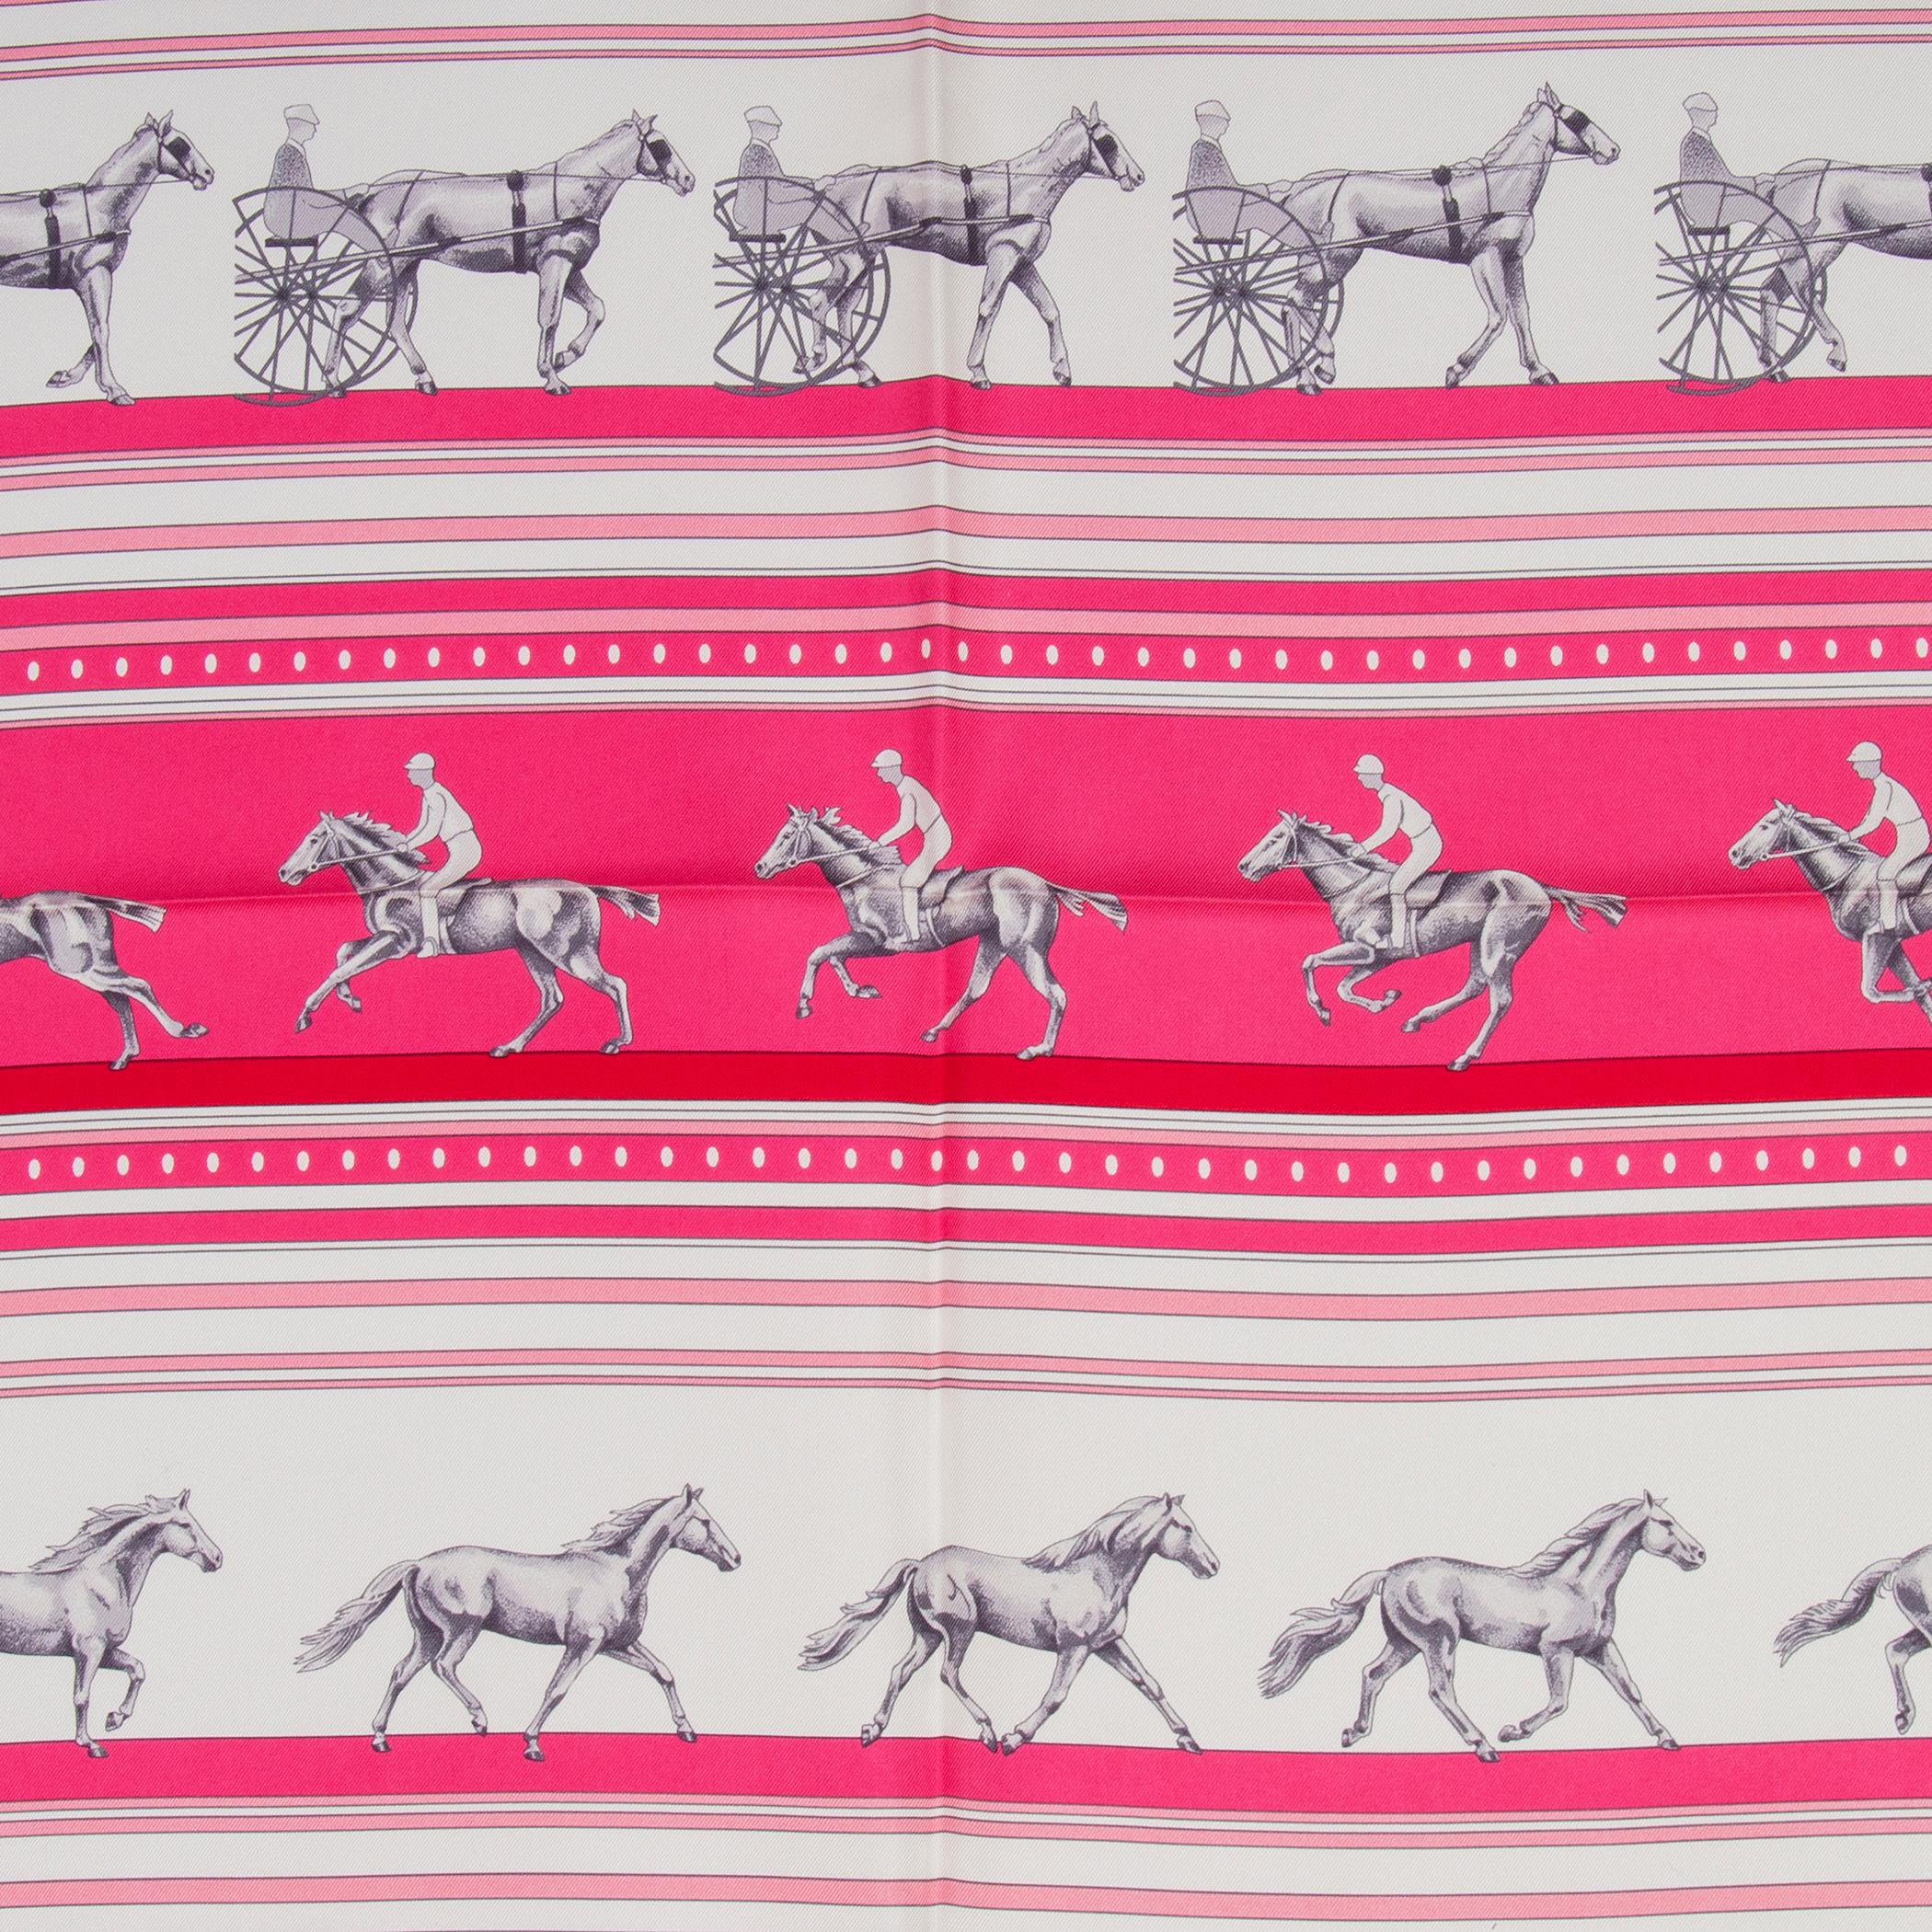 Hermès 'Sequences' limited colorway scarf in pink, red, and off.white silk twill (100%). Brand new.

Width 90cm (35.1in)
Height 90cm (35.1in)